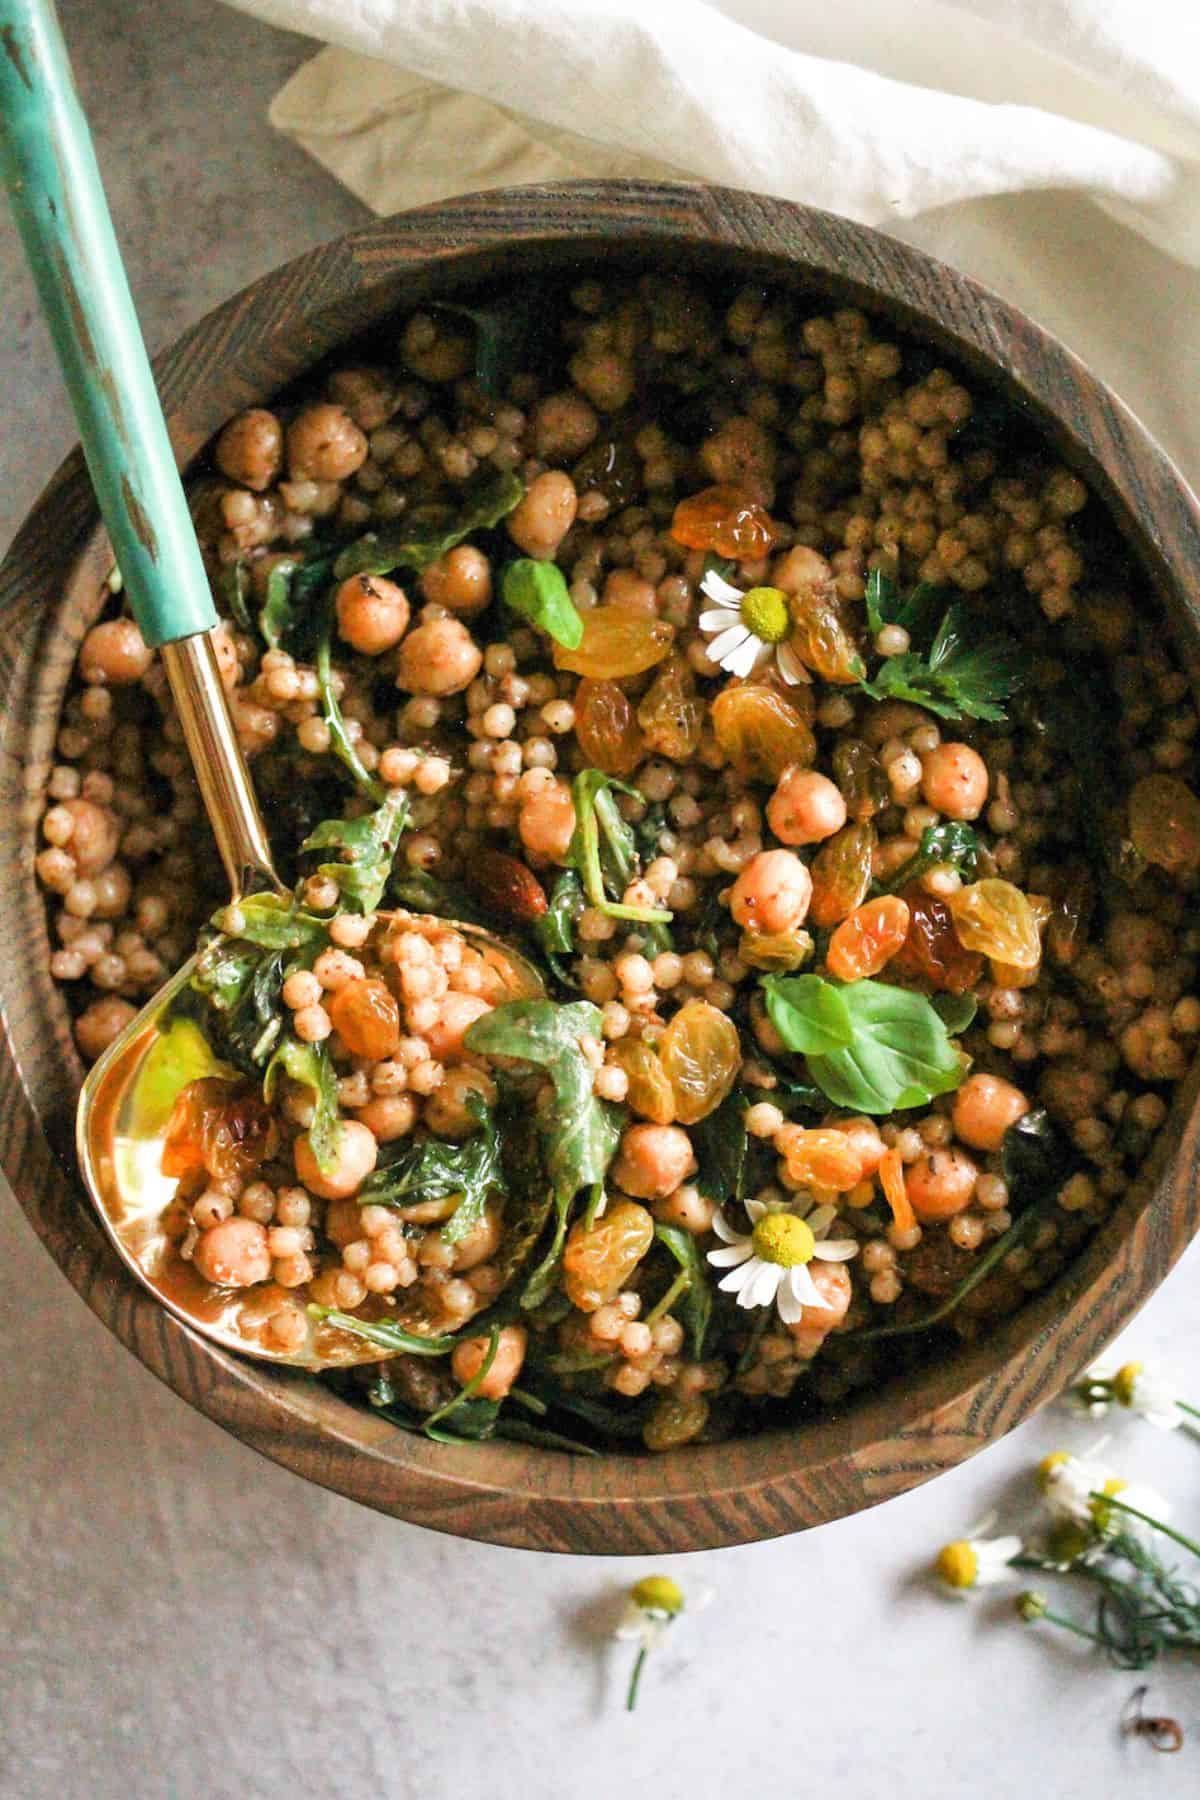 Easy vegetarian coucous salad with chickpeas in a wood bowl.